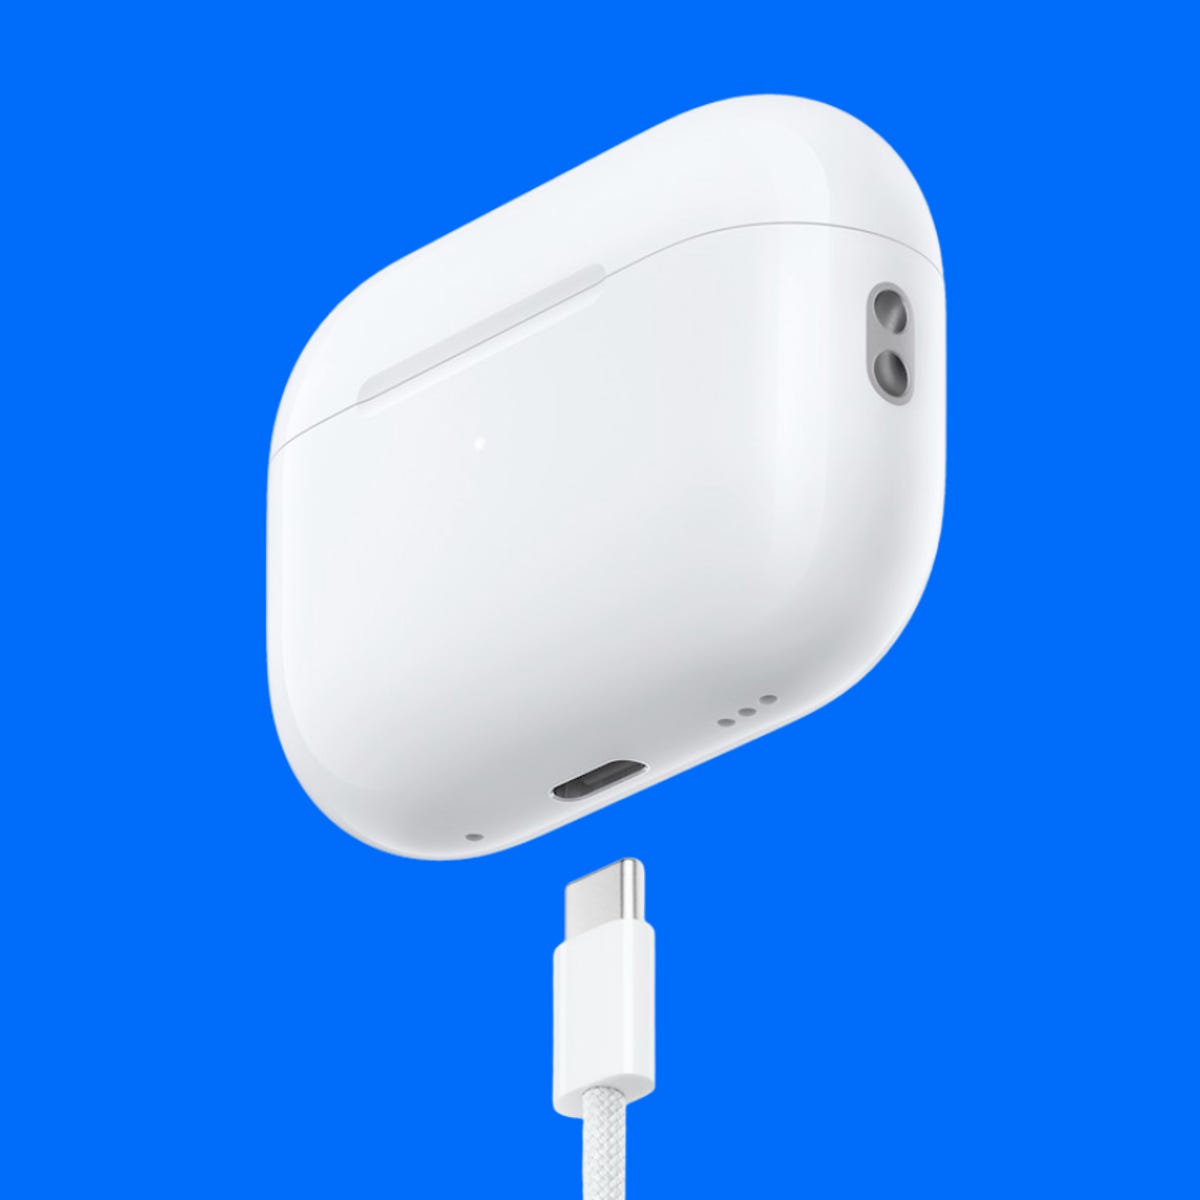 Apple Is Now Selling the USB-C AirPods Pro 2's Charging Case Separately -  CNET